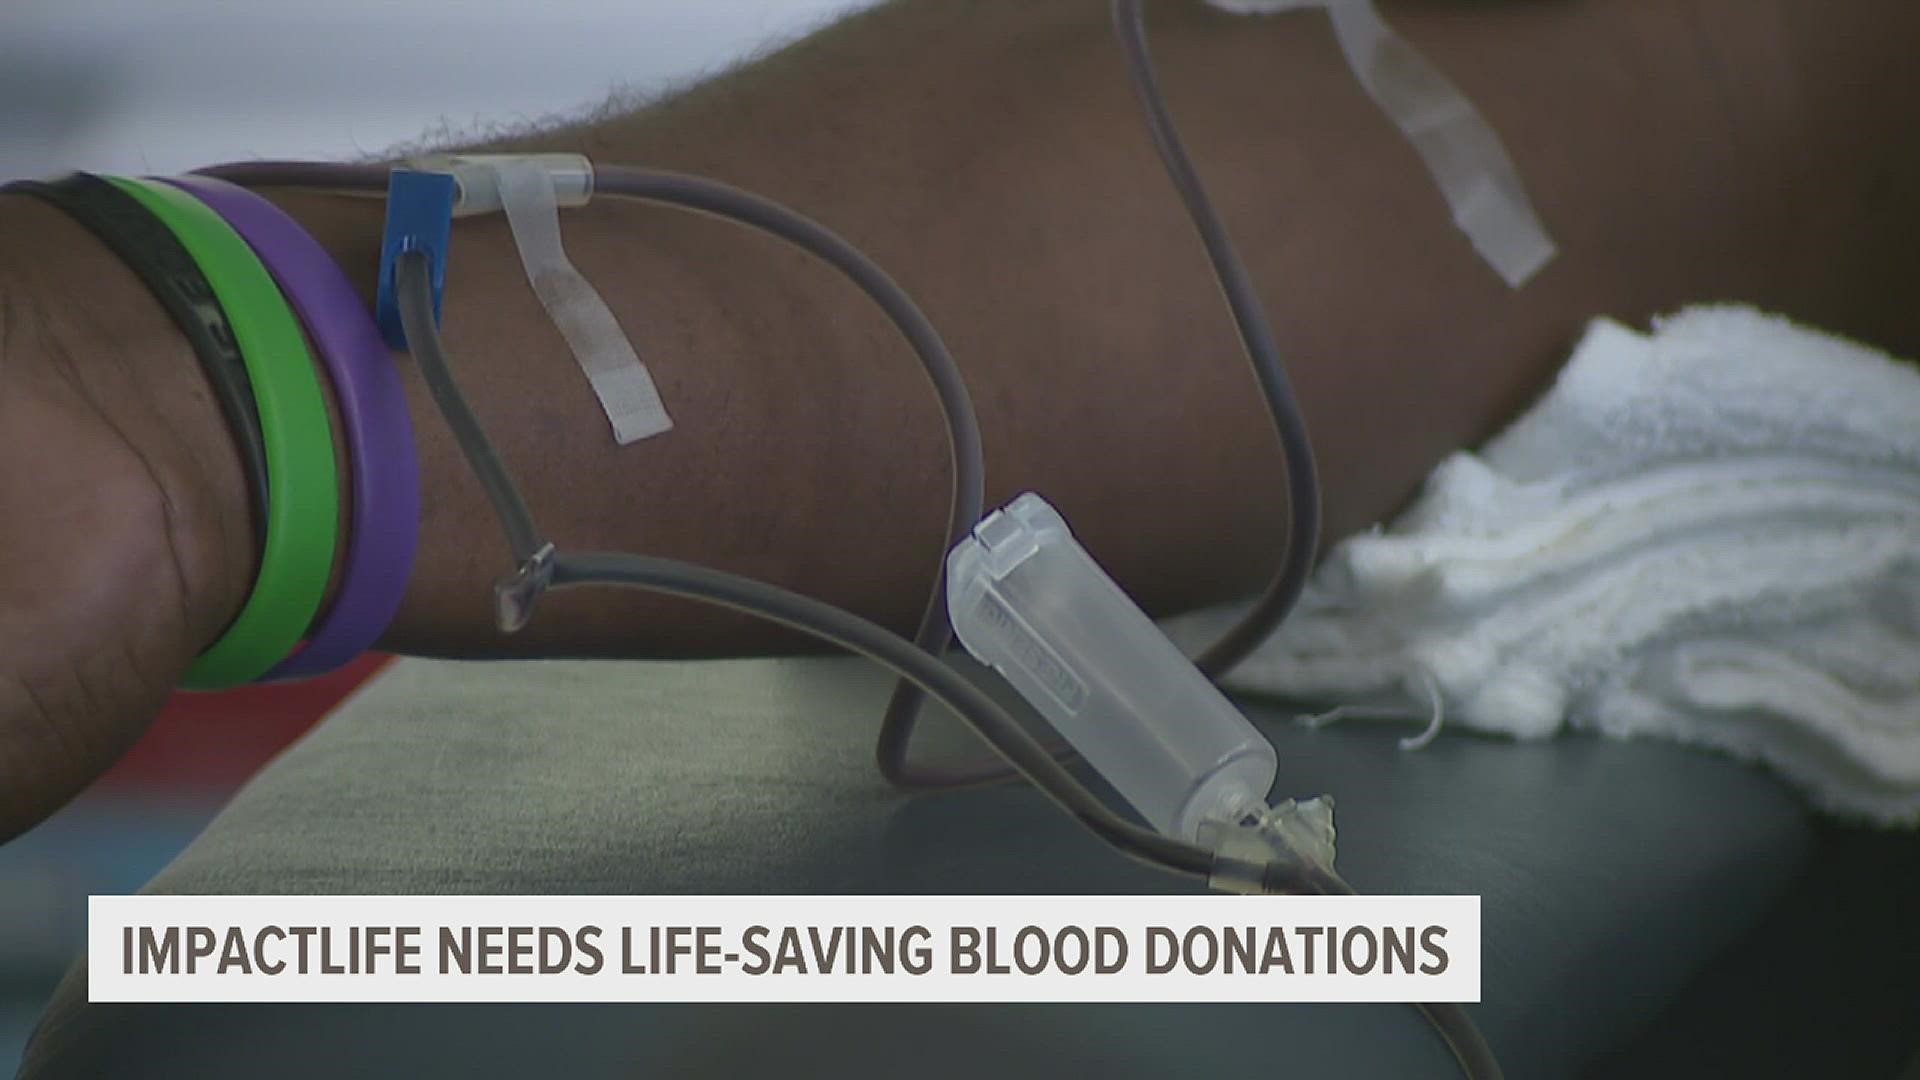 The use of blood donation never stops, including around the holidays. Here's how you can help.